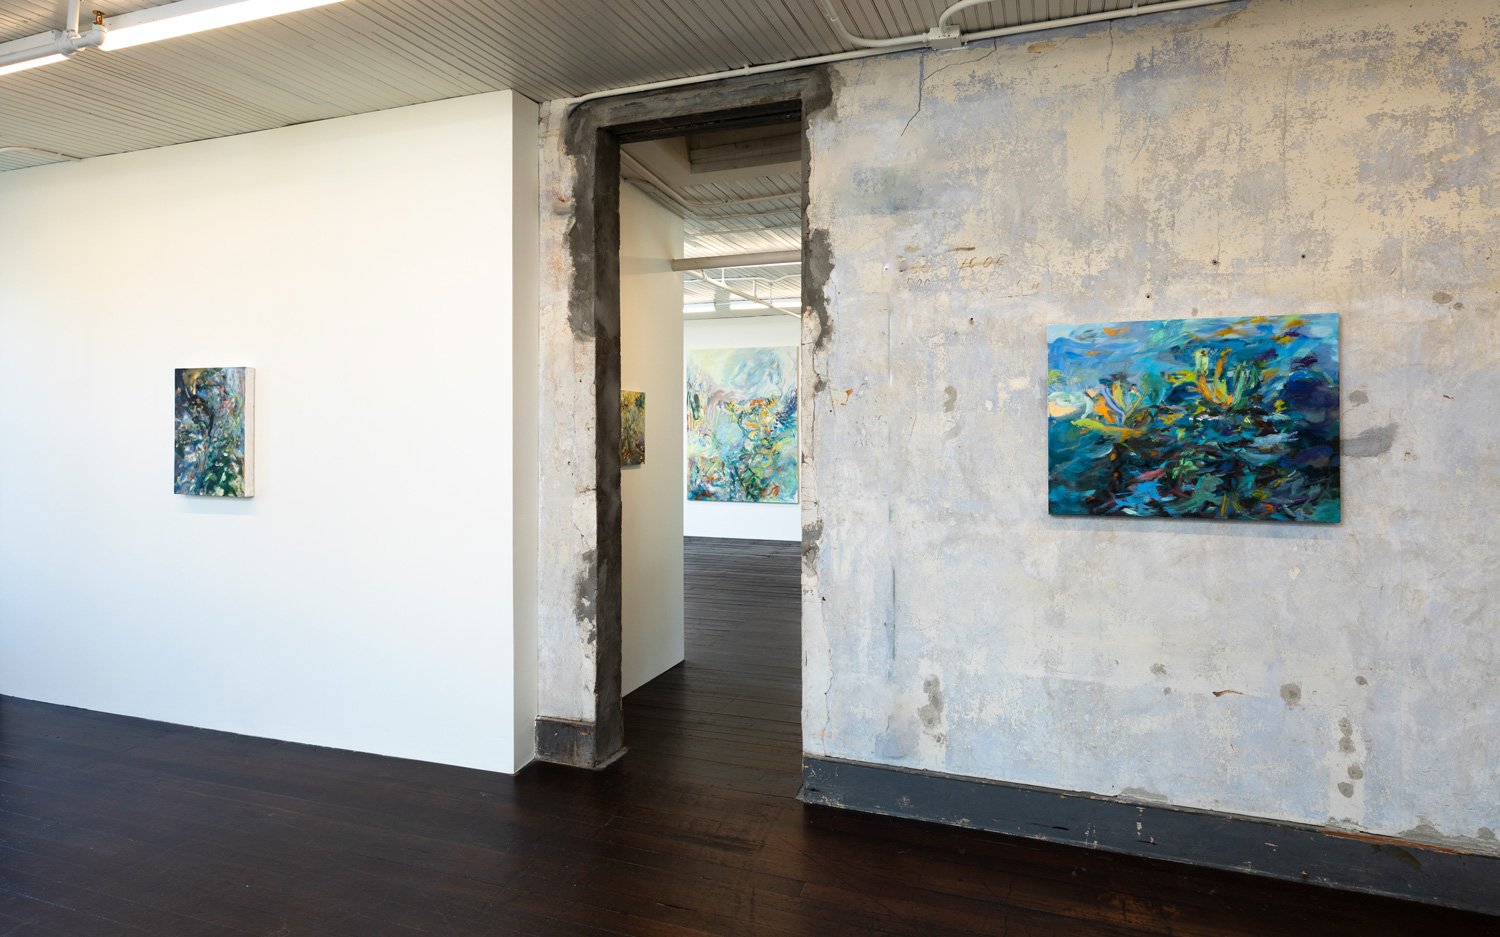 Installation view, solo show "Ambrosia" at SEPTEMBER Gallery